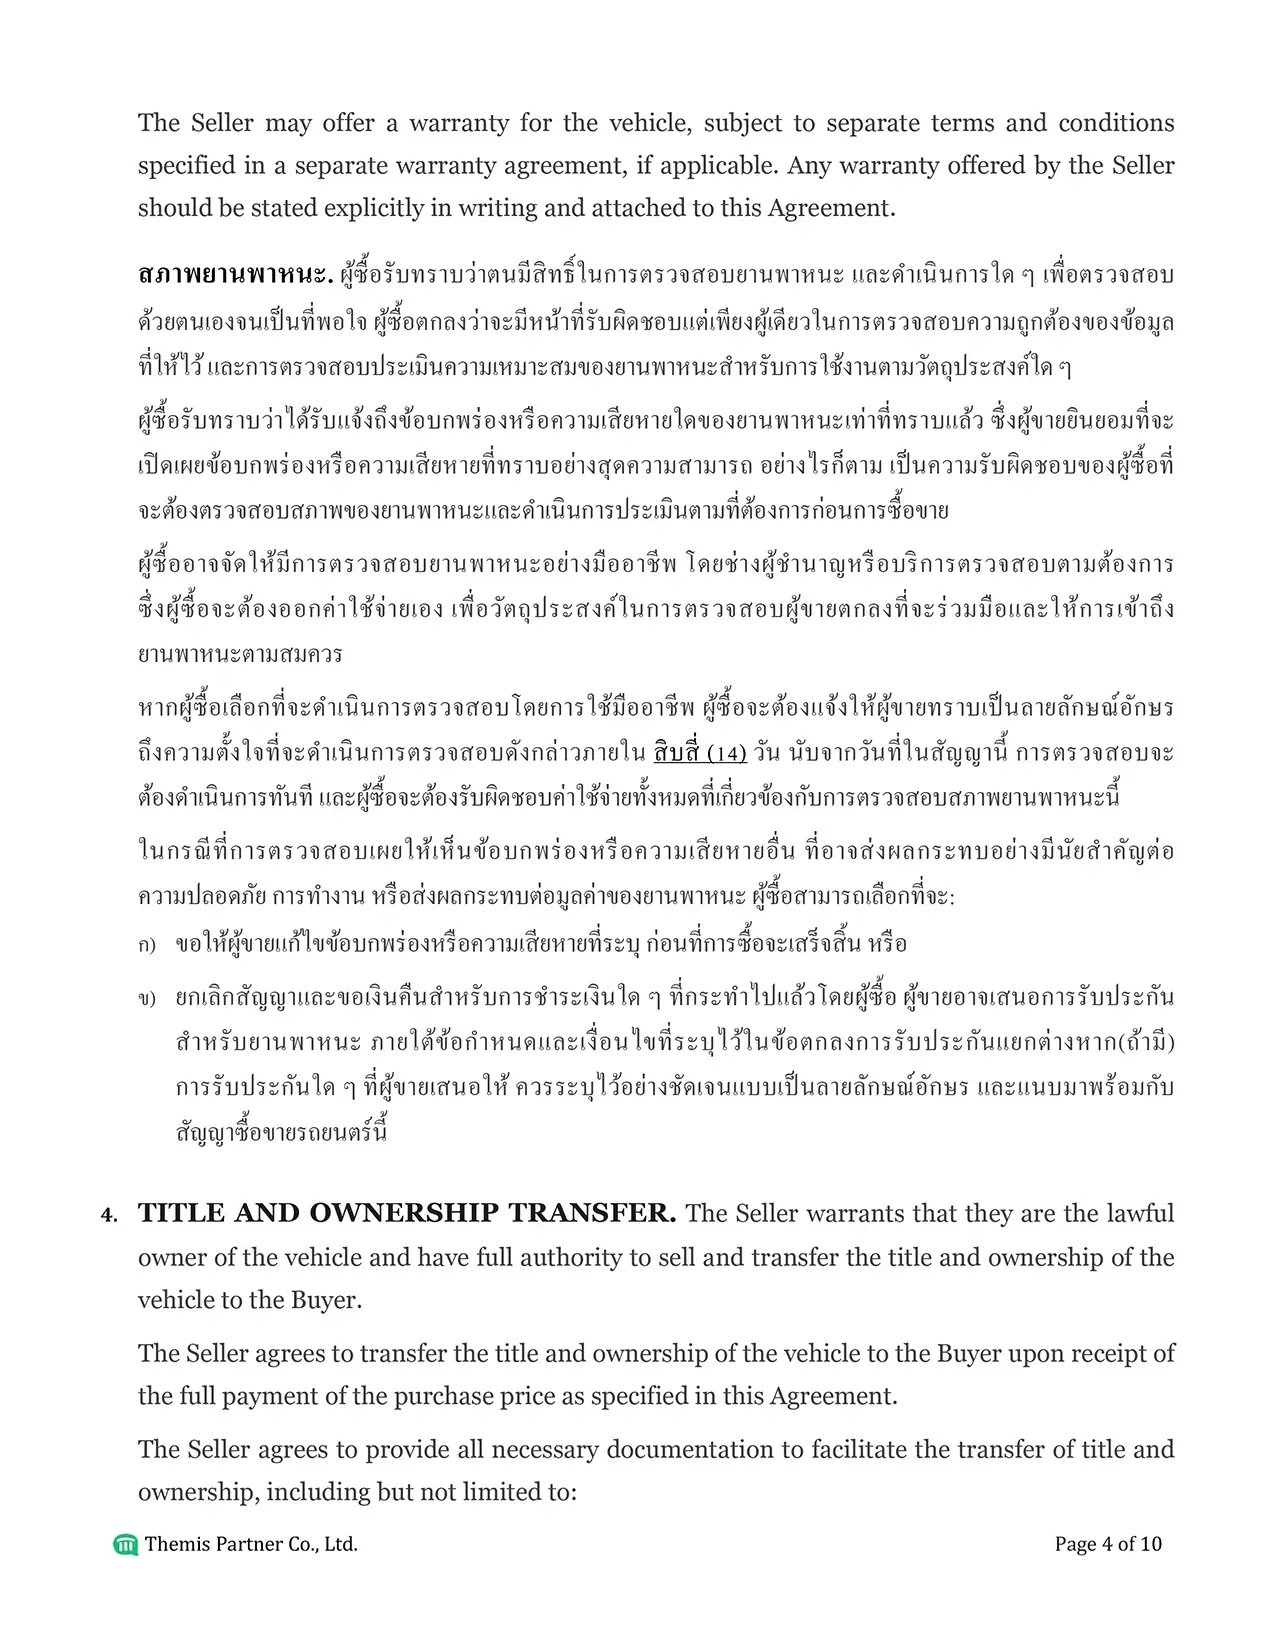 Car purchase contract Thailand 4